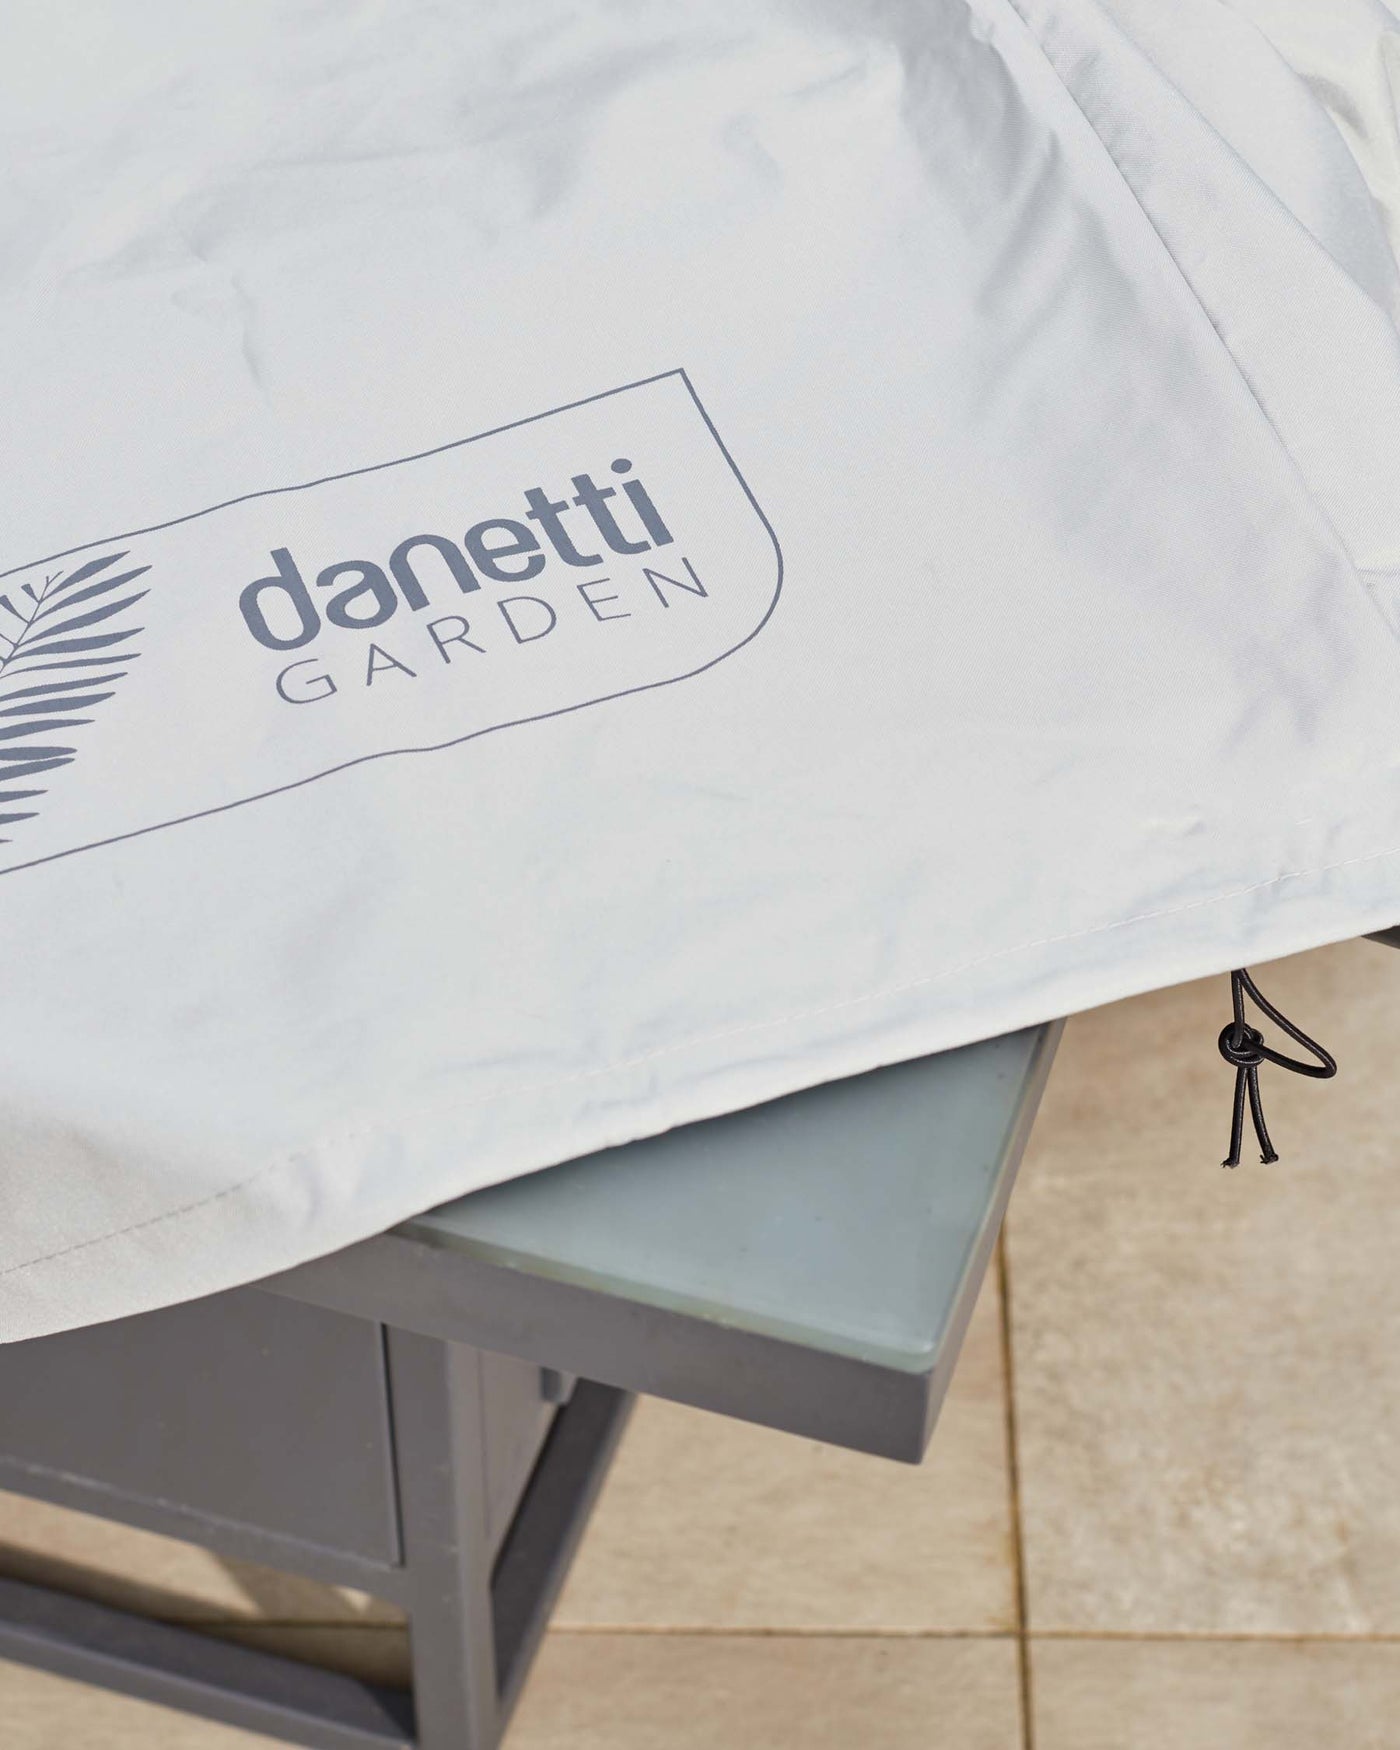 A close-up of a modern outdoor cushion with white fabric, featuring the "Danetti Garden" logo, placed on a frosted glass tabletop supported by a sleek grey metal frame.